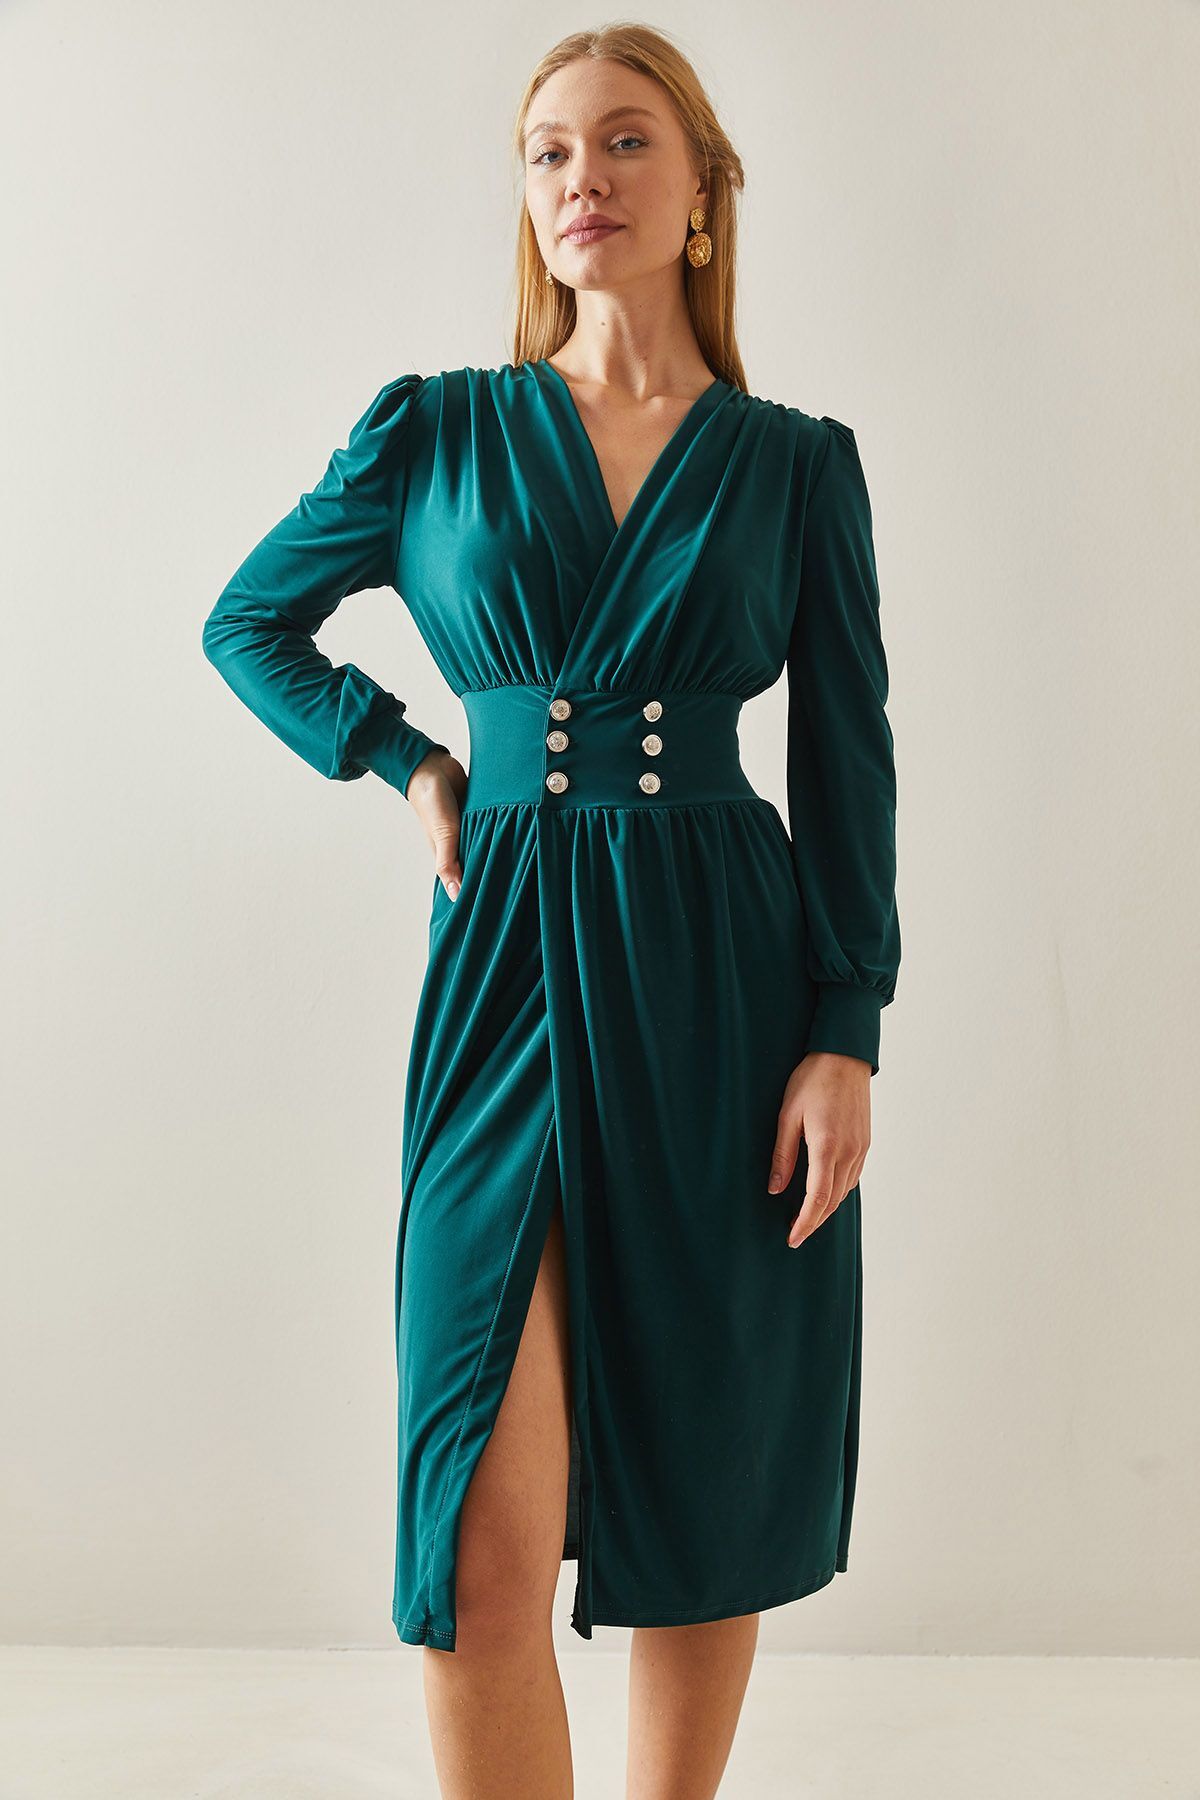 XHAN Emerald Green Double Breasted Neck Slit and Buttoned Midi Dress